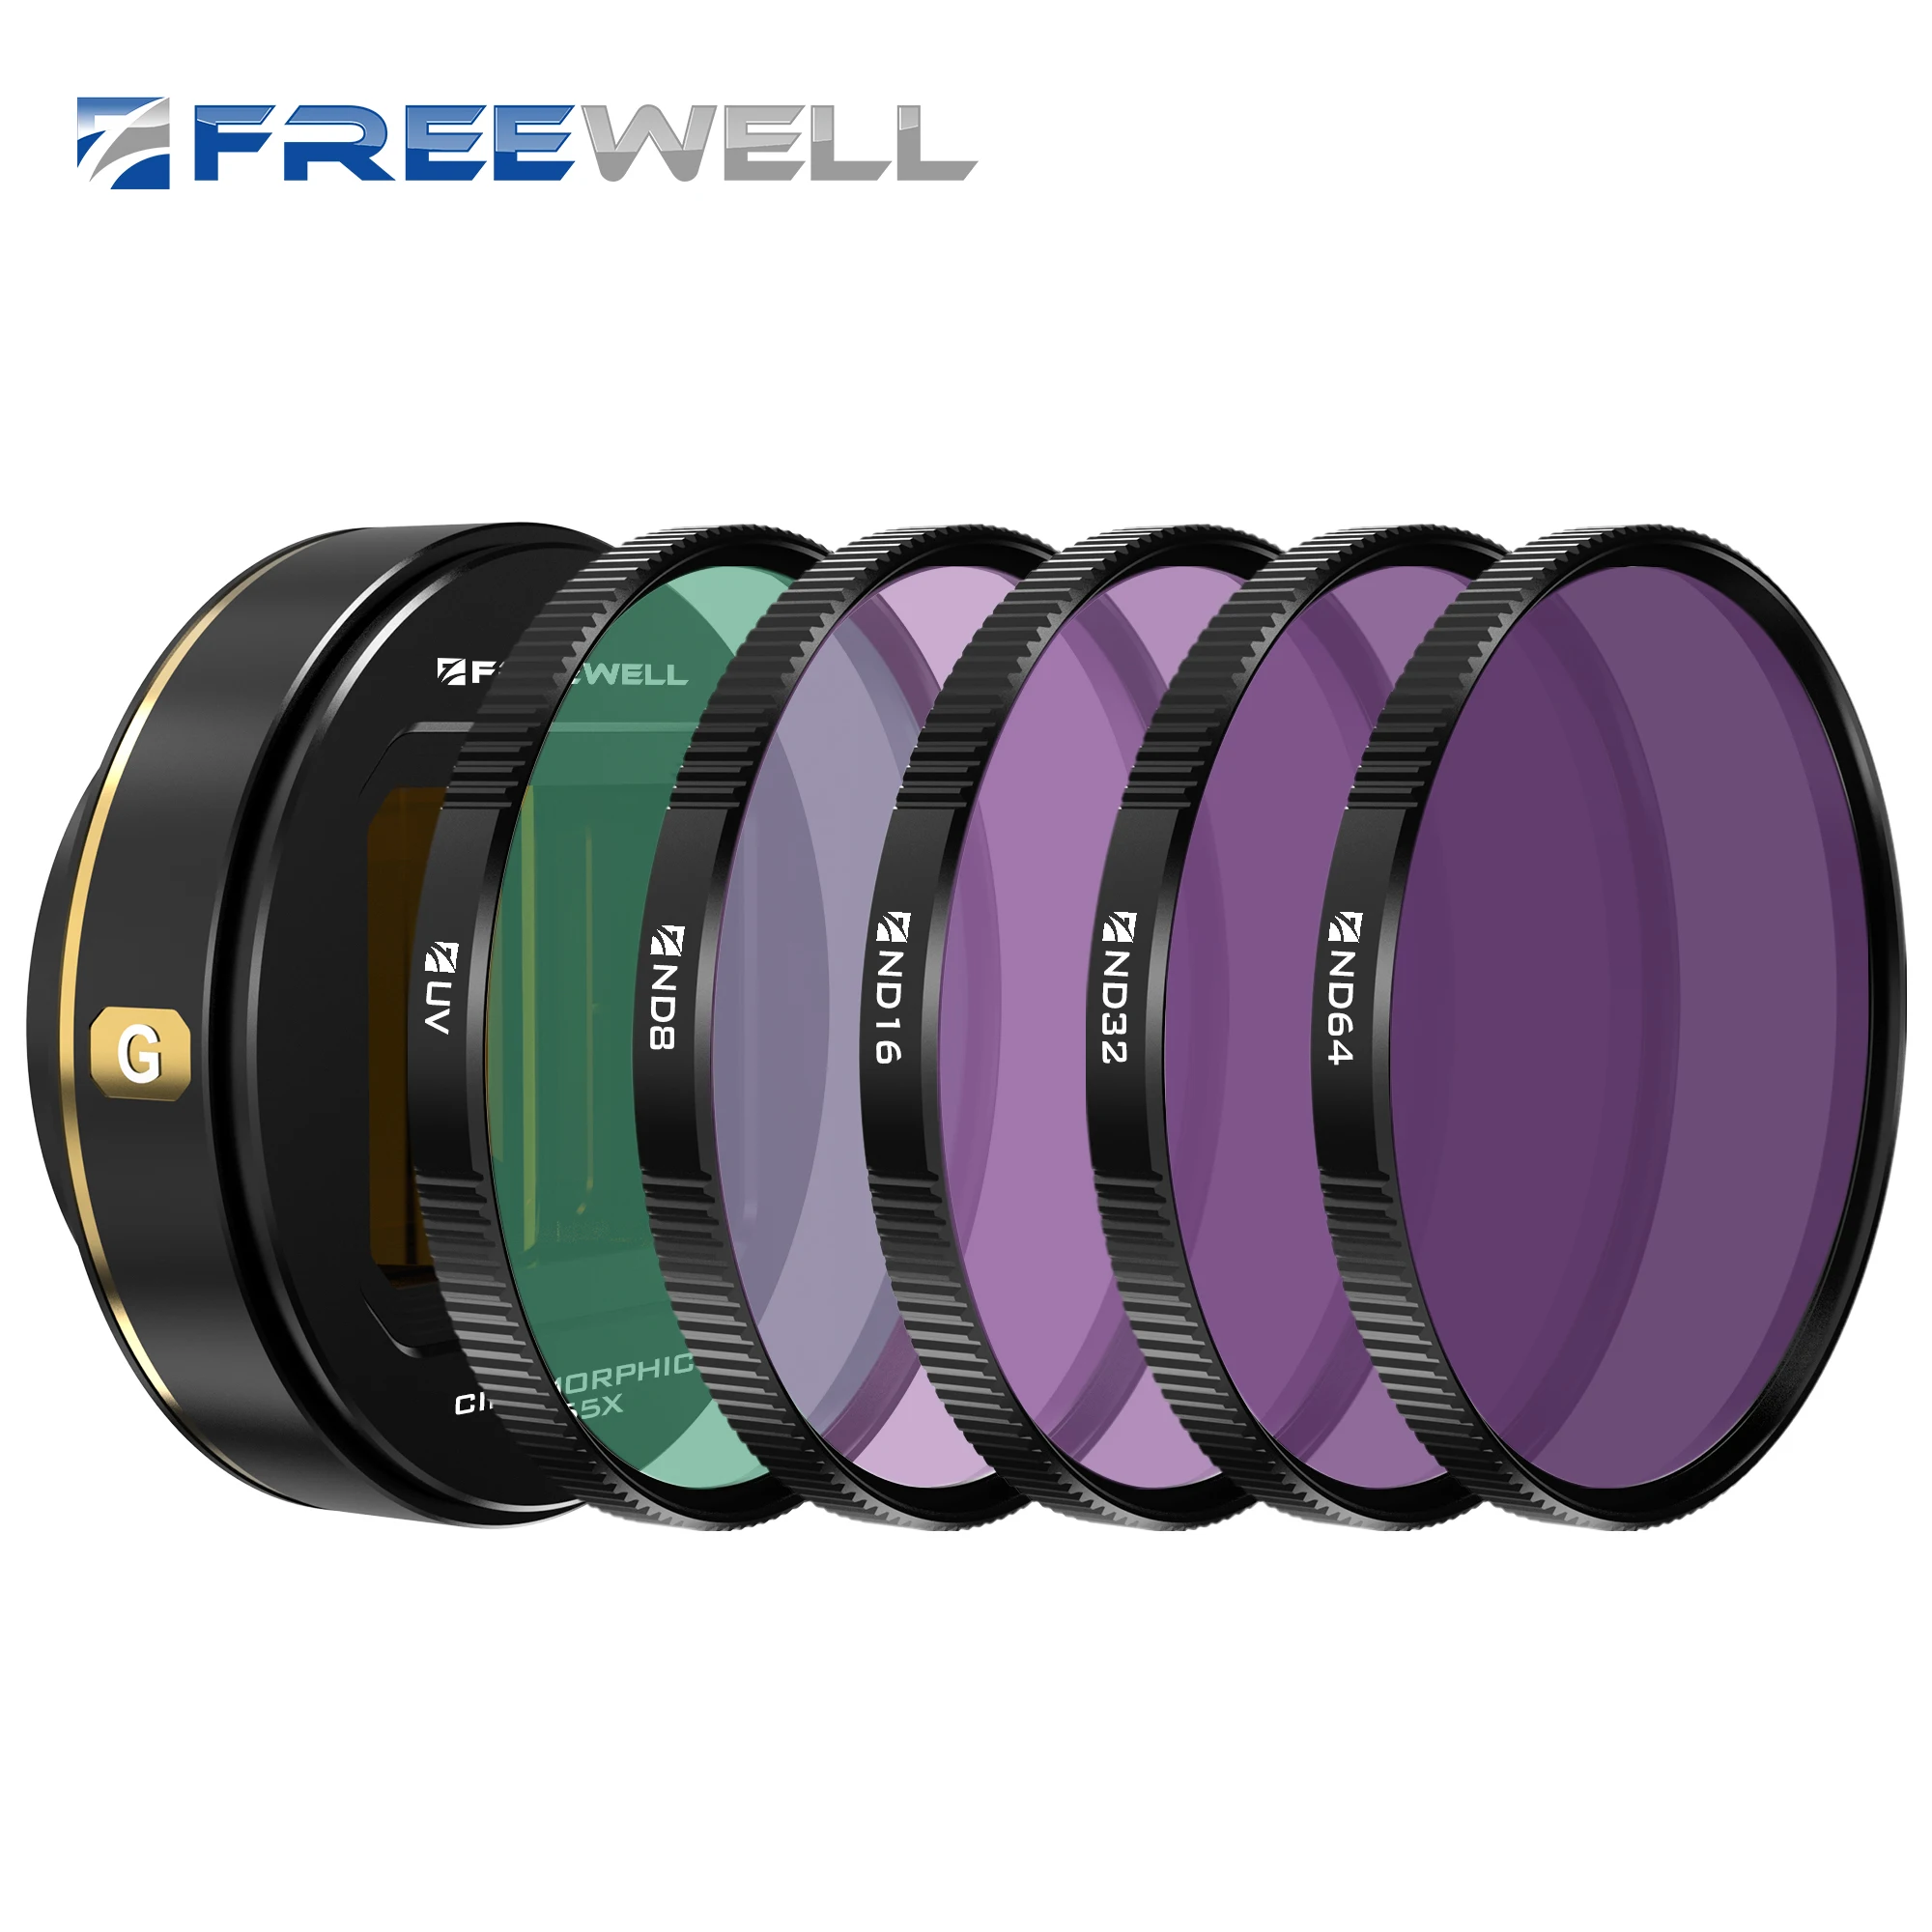 

Freewell 1.55X Anamorphic Lens with UV, ND8, ND16, ND32, and ND64 Compatible only with Freewell Sherpa & Galaxy Series Cases